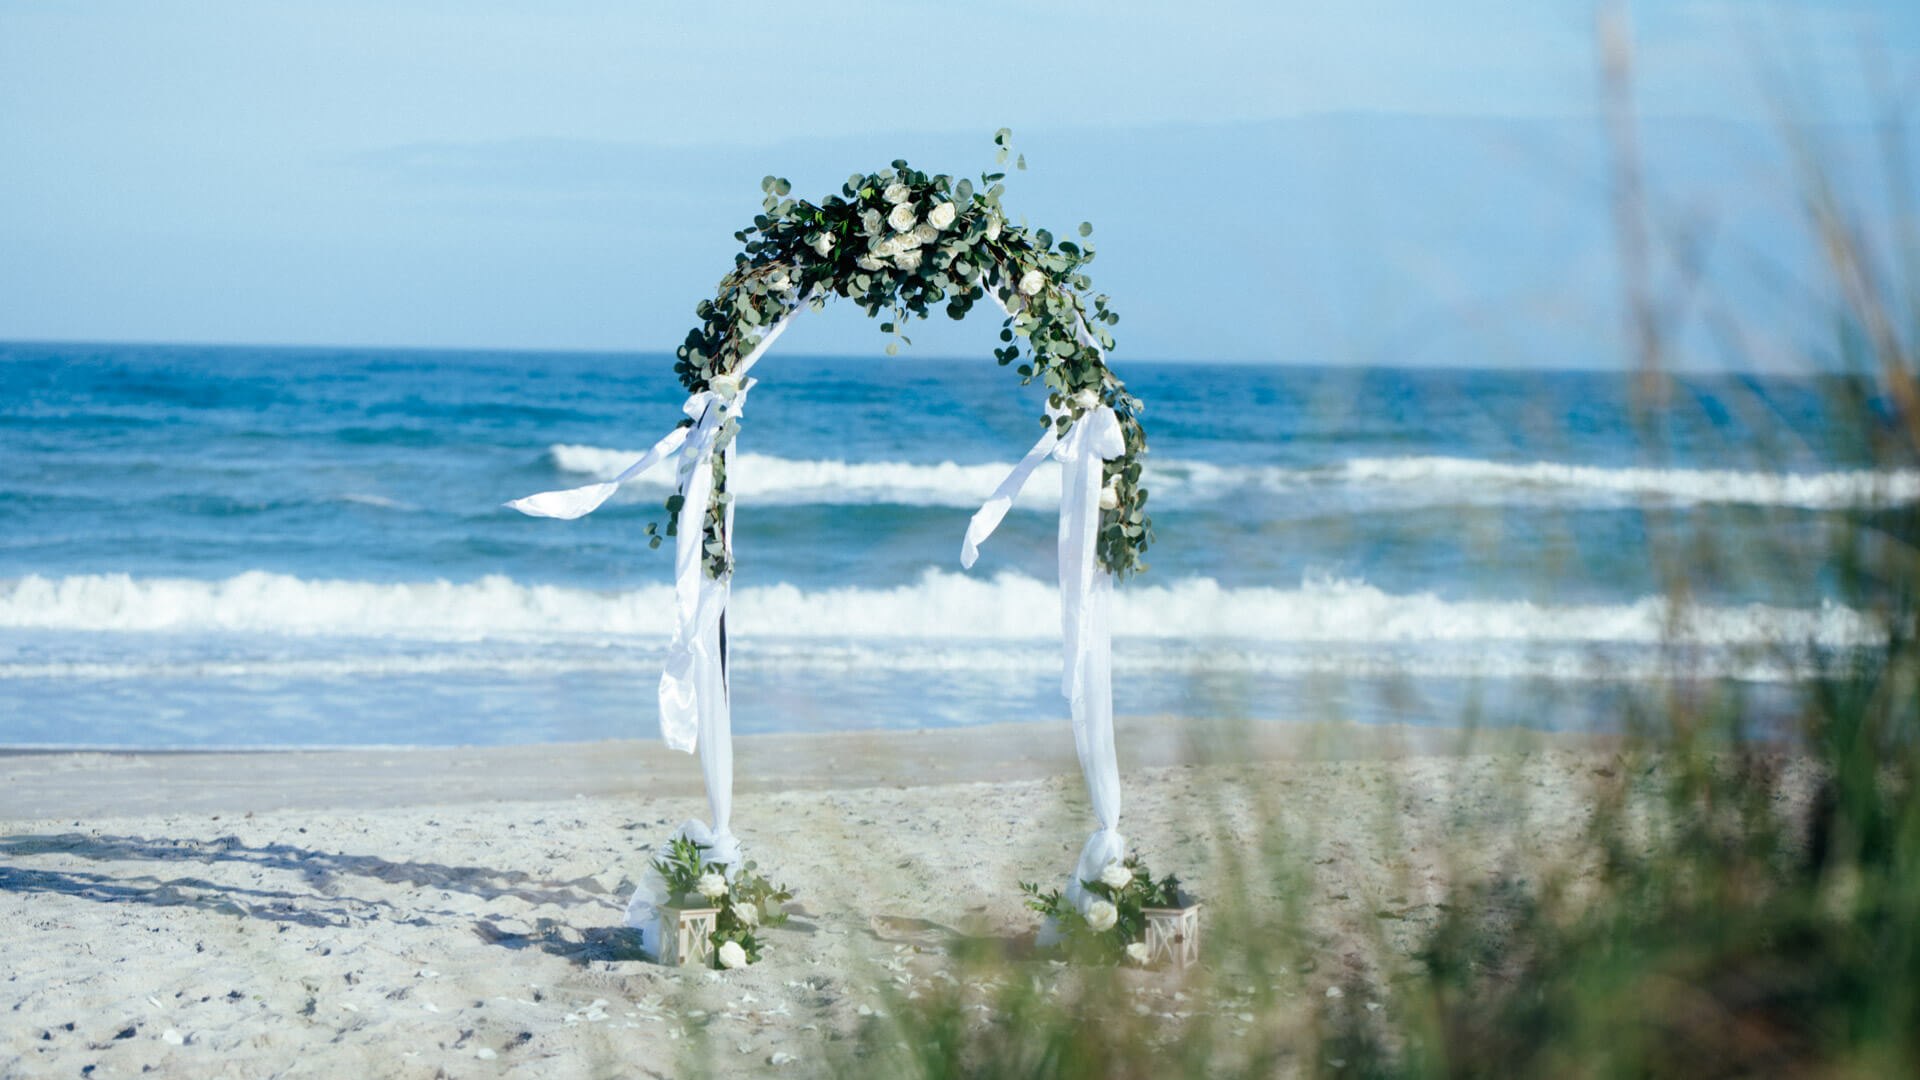 Beach wedding package for 2 Florida, photo showing round wedding arch with fresh flowers in Cocoa Beach